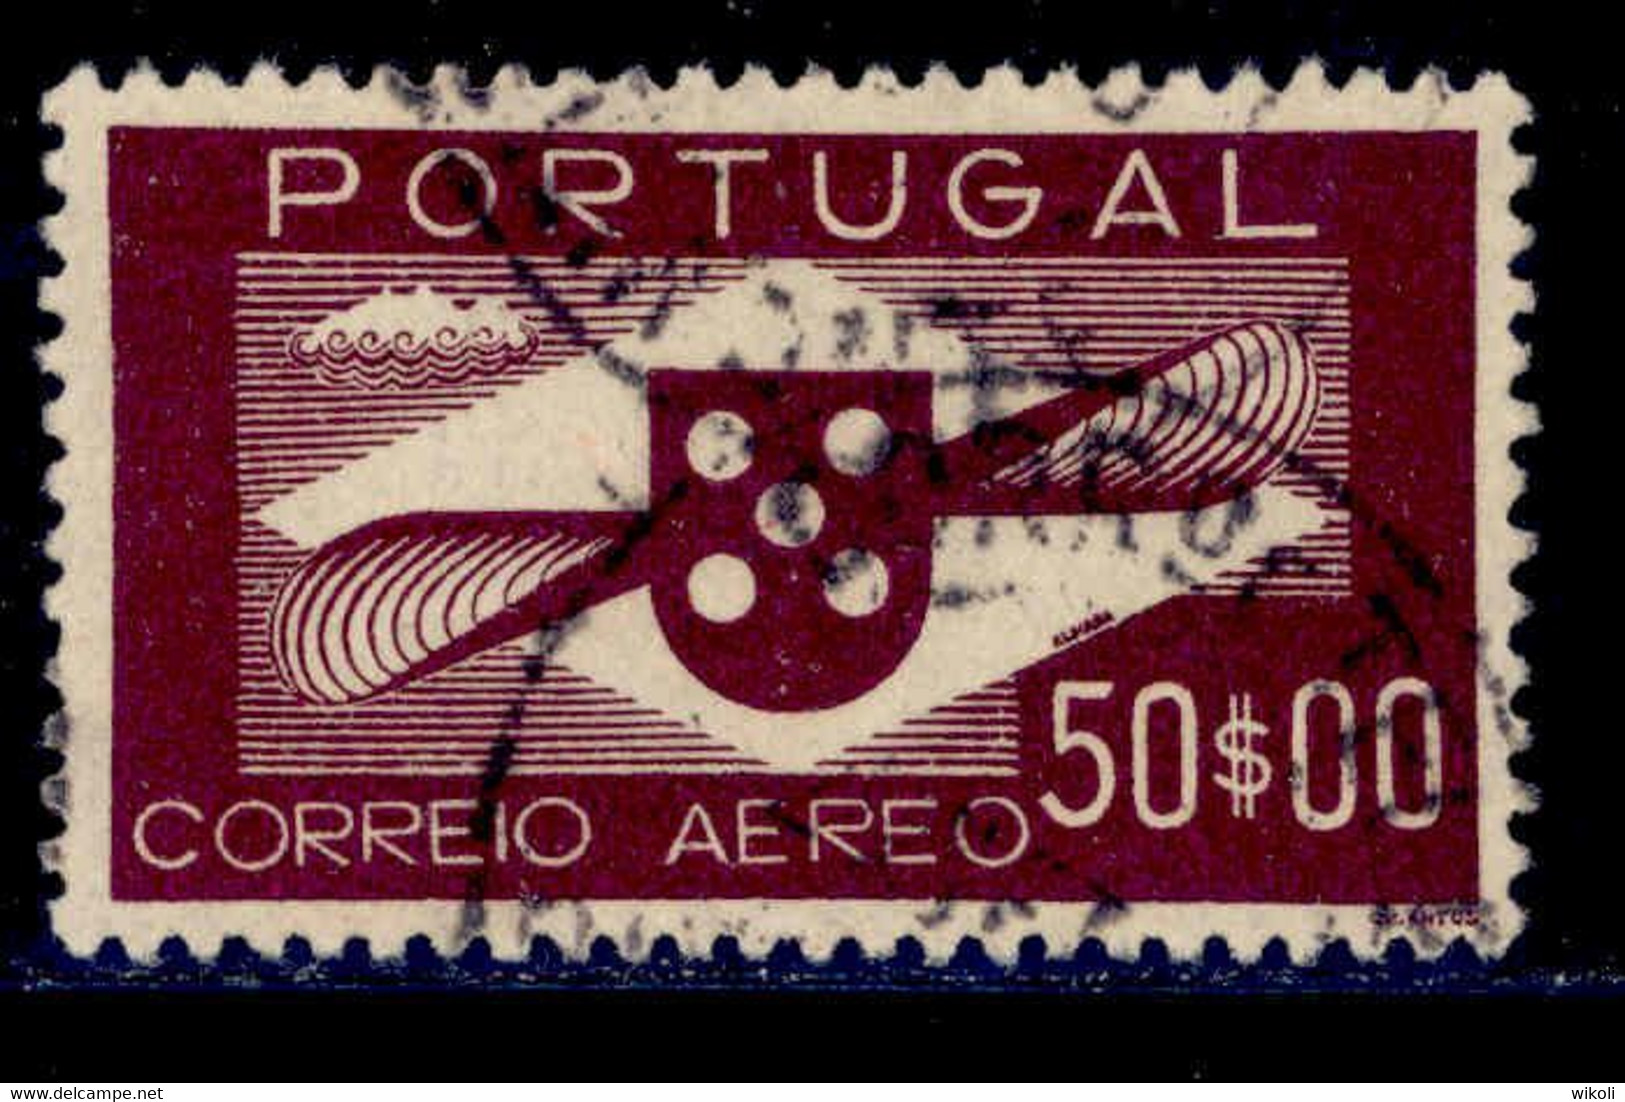 ! ! Portugal - 1936 Air Mail 50$00 (top Value) - Af. CA 10 - Used - Used Stamps